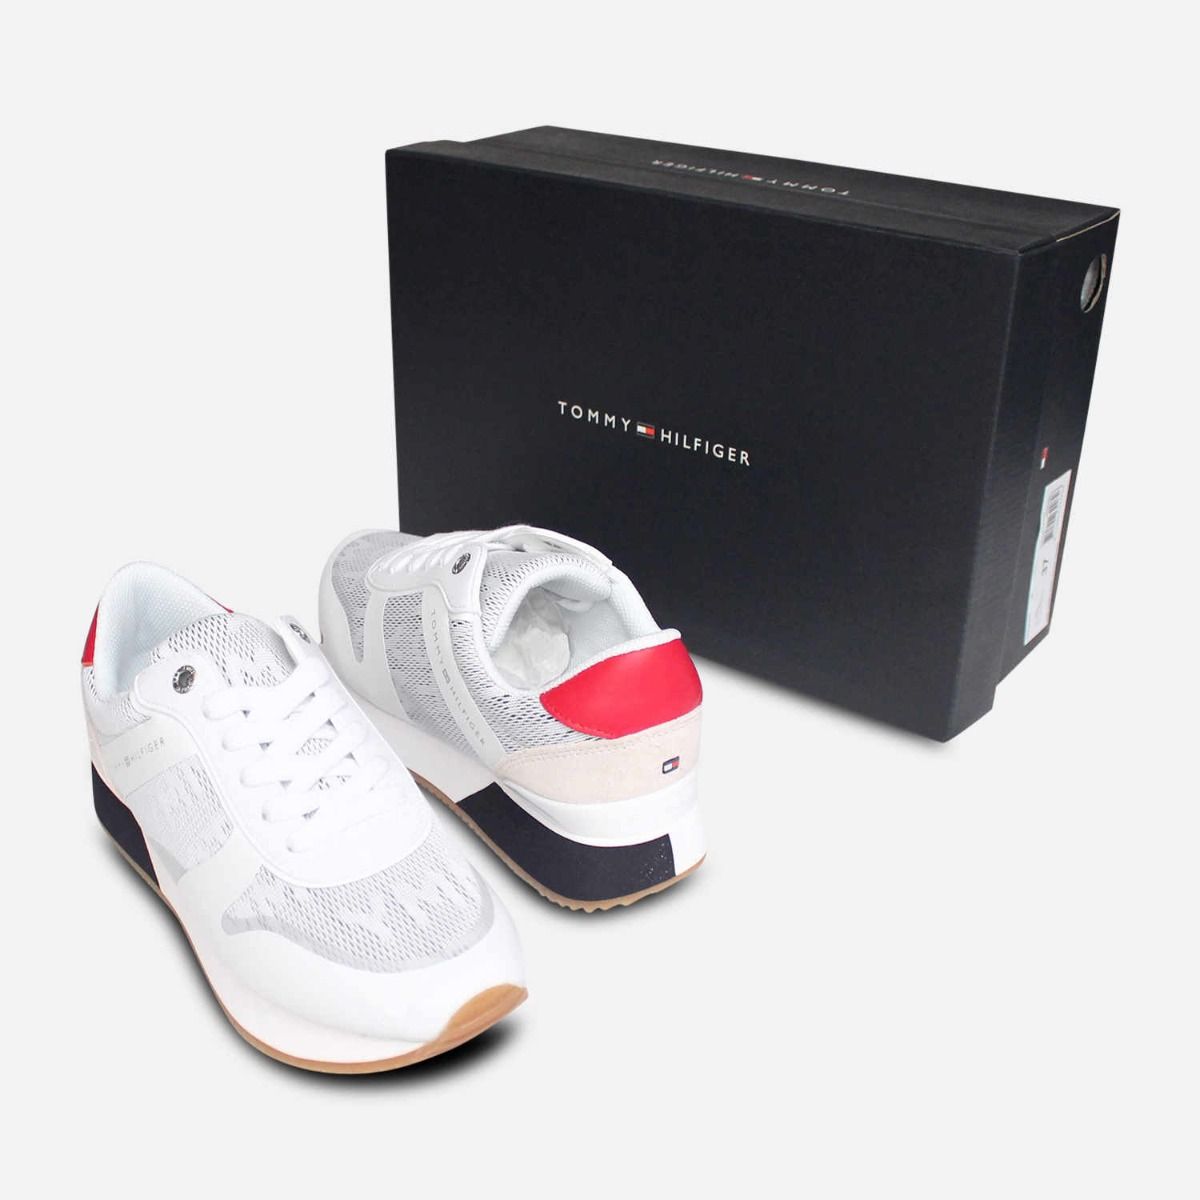 Exclusive Tommy Hilfiger City Sneakers 